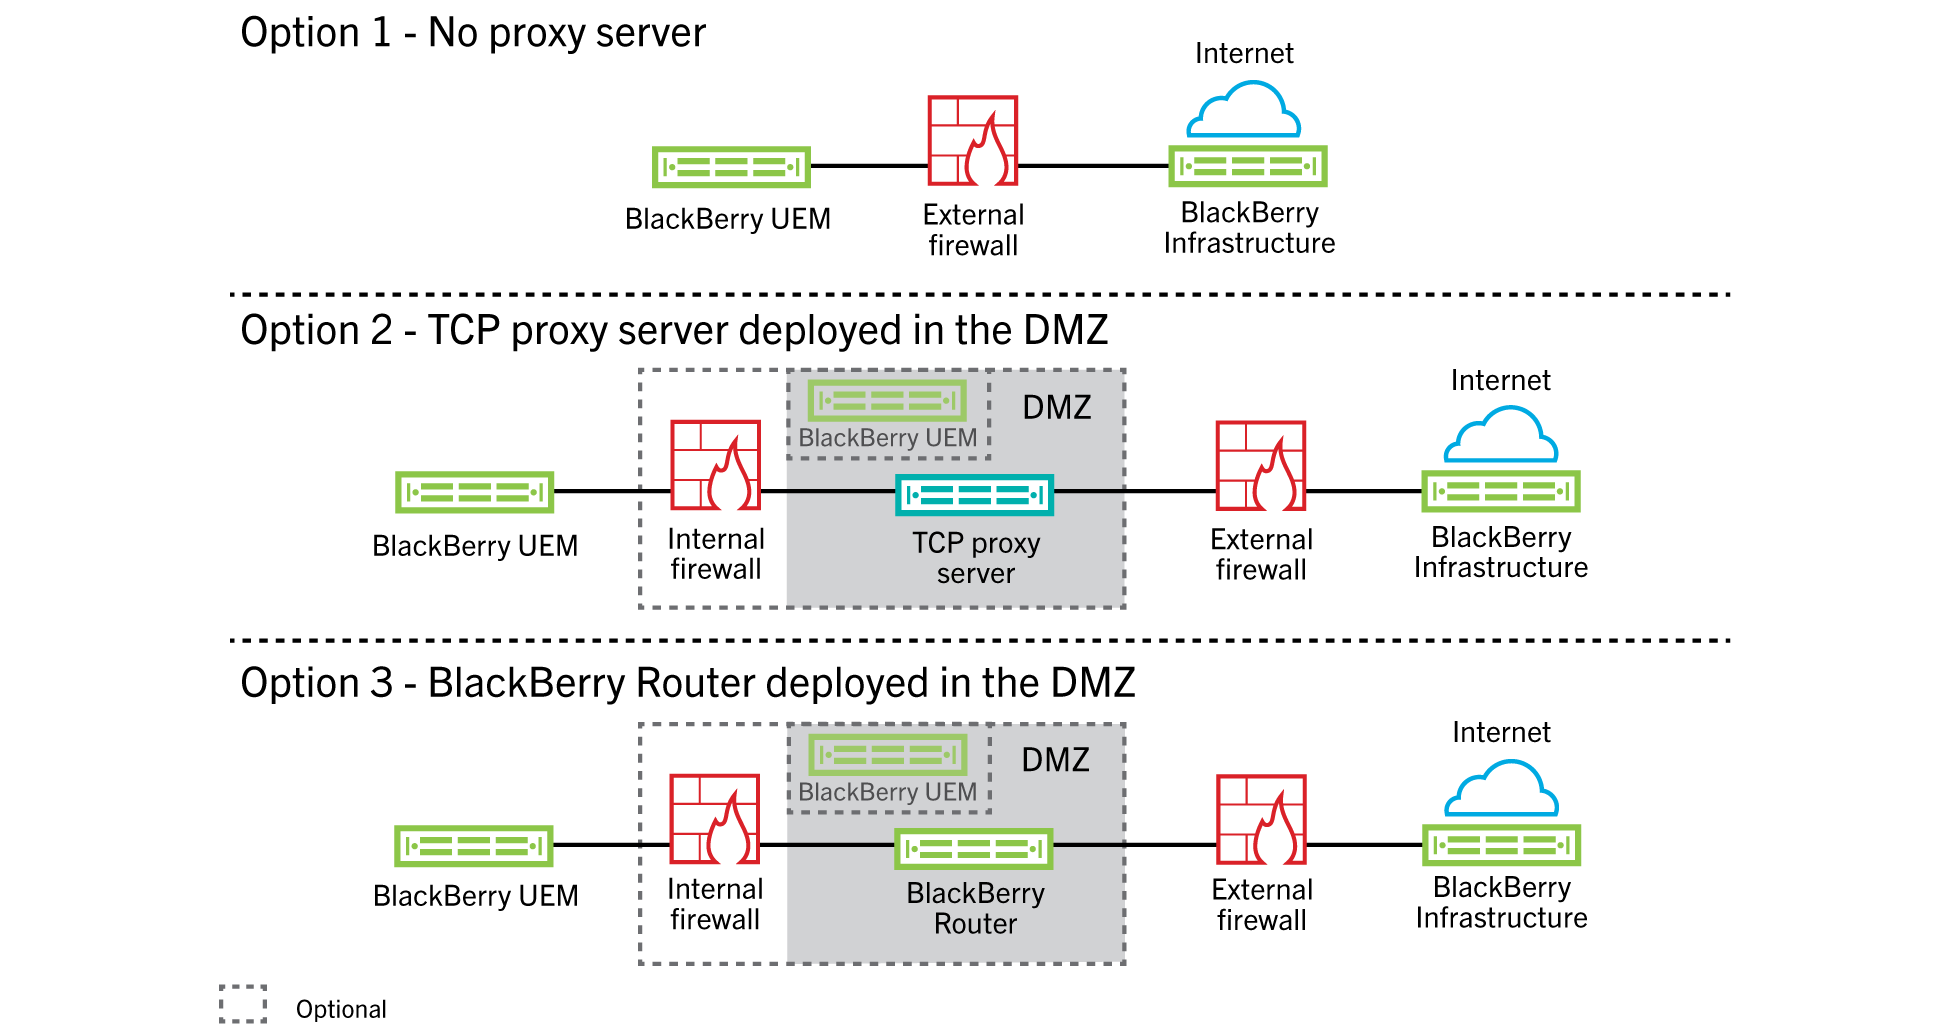 Image showing BlackBerry UEM configured to use no proxy server, and a TCP proxy server deployed in the DMZ.